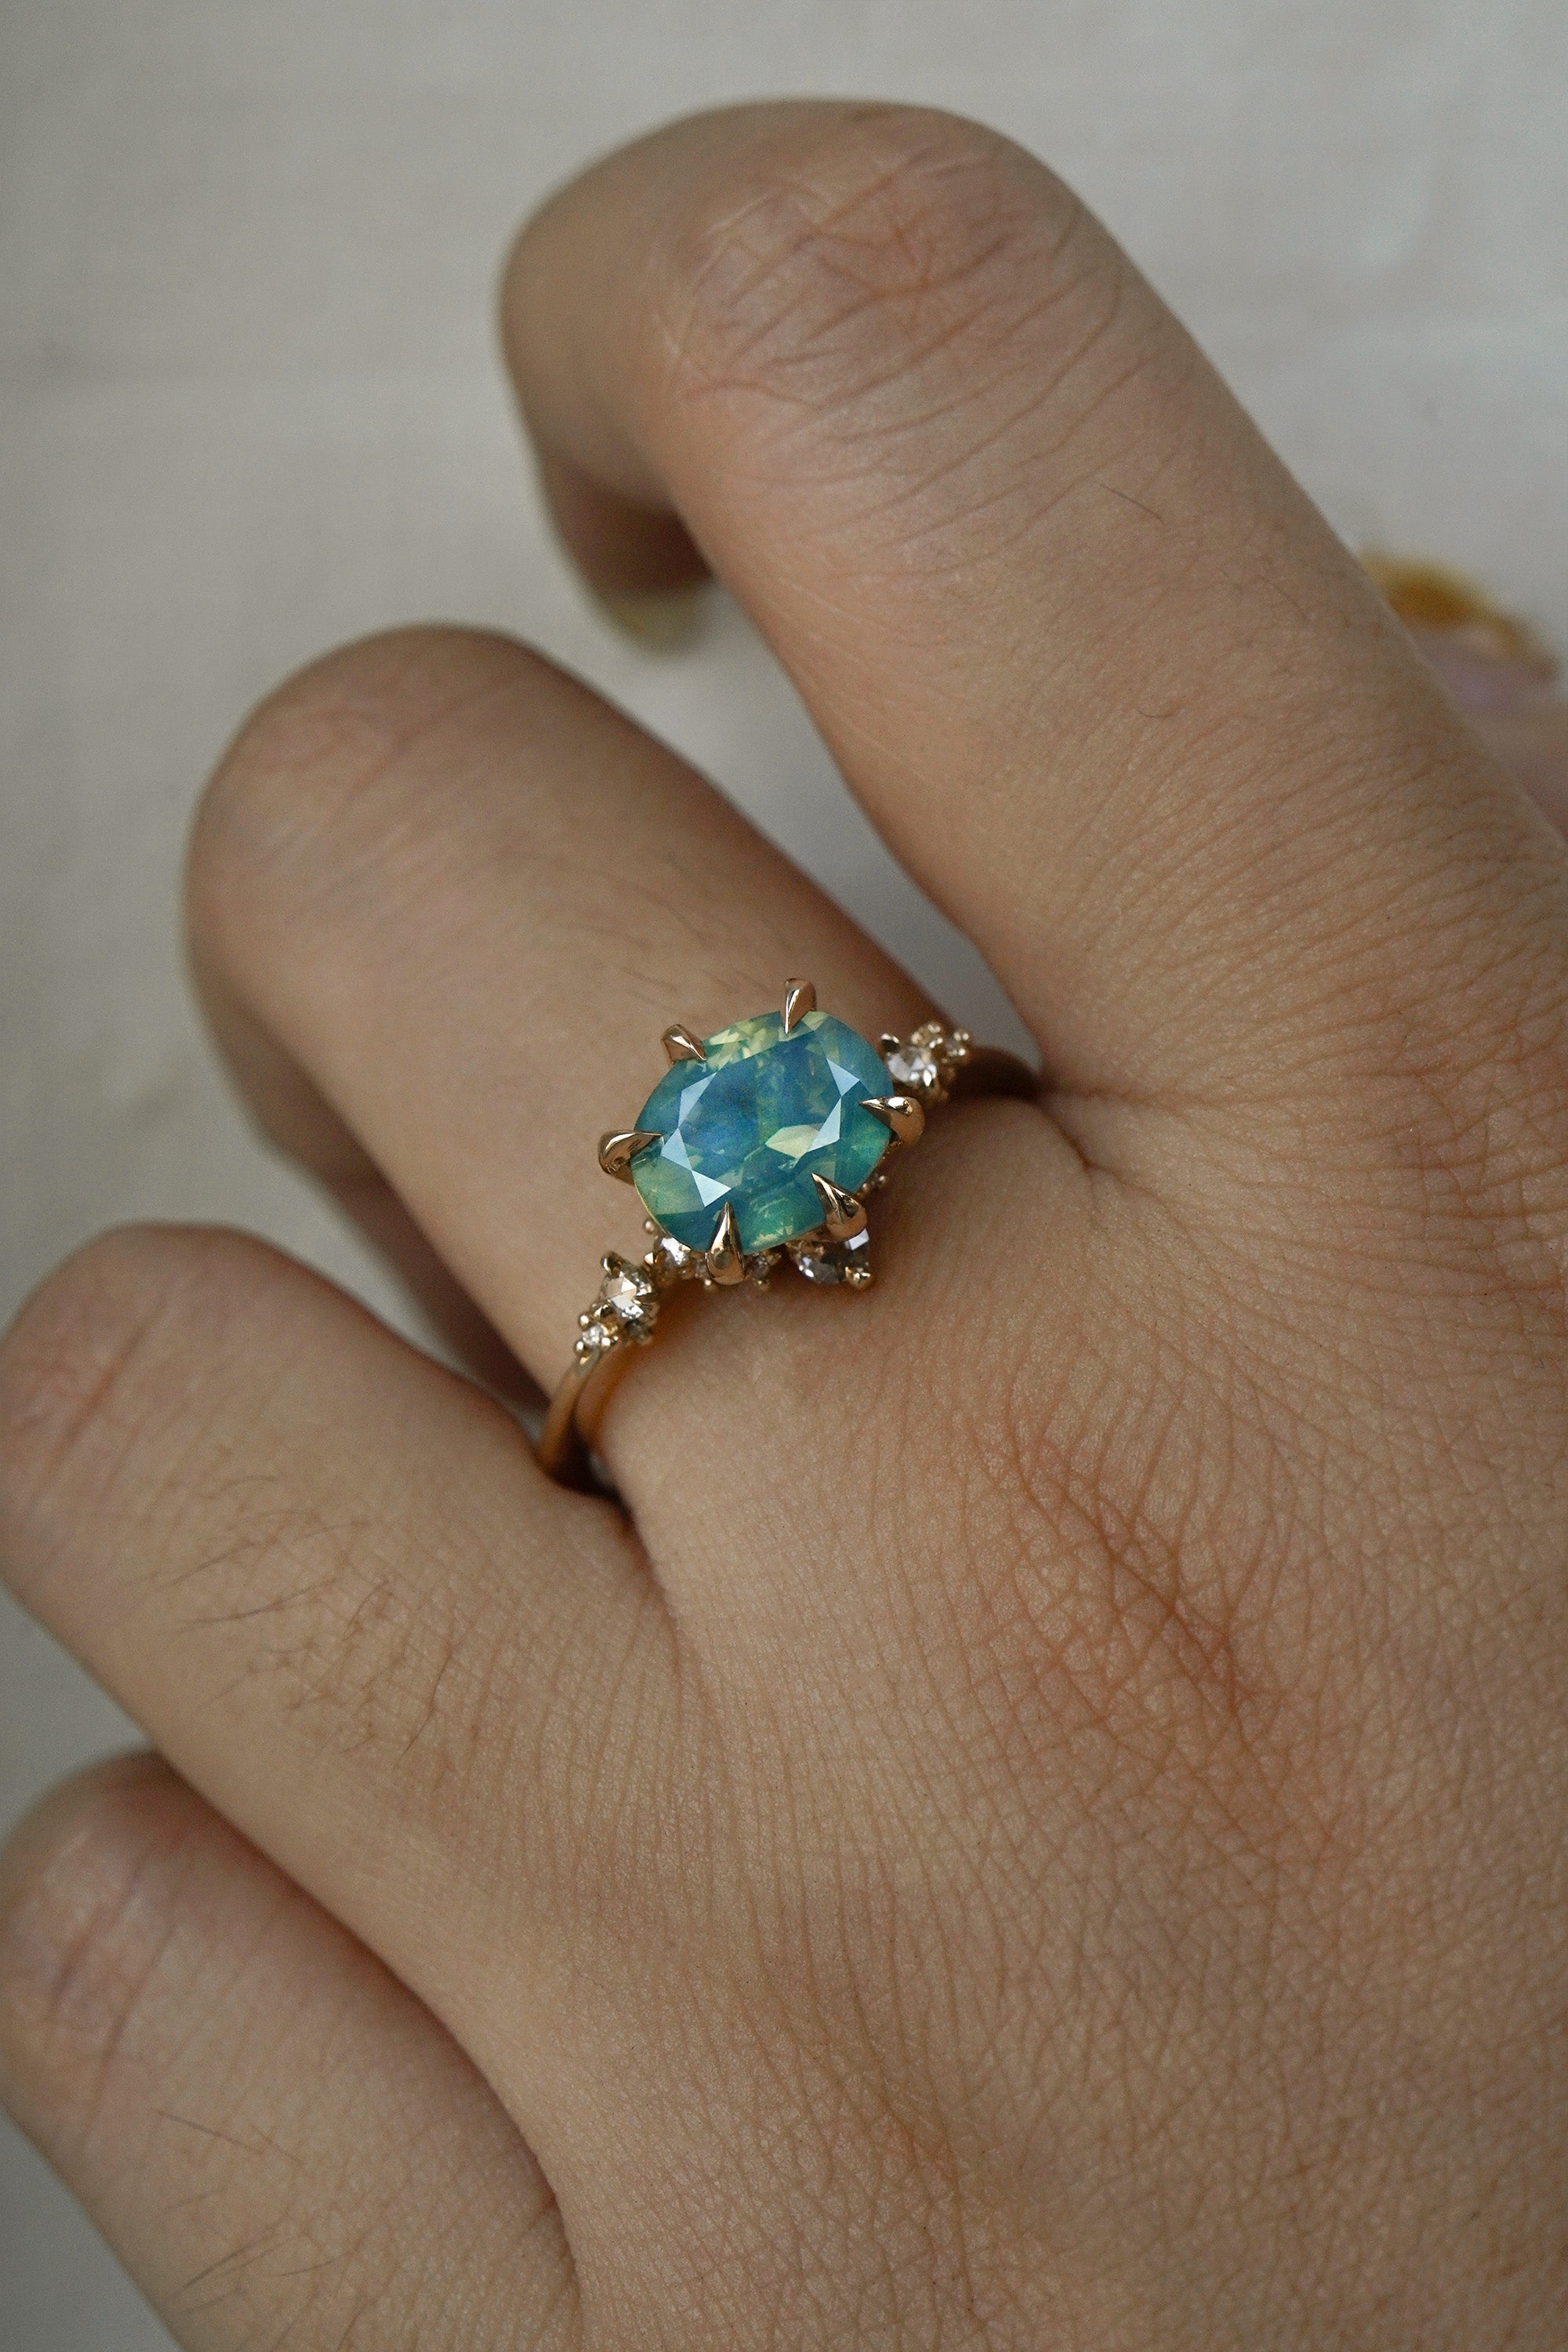 A delicate and ethereal "Nereid" one of a kind engagement ring by Laurie Fleming Jewellery, with a unique opalescent silky teal/turquoise/blue sapphire in an oval cut. The band is adorned with rose and brilliant cut diamonds and the ring is made in solid 14k yellow gold. The ring is worn on a hand against a plain light grey background.